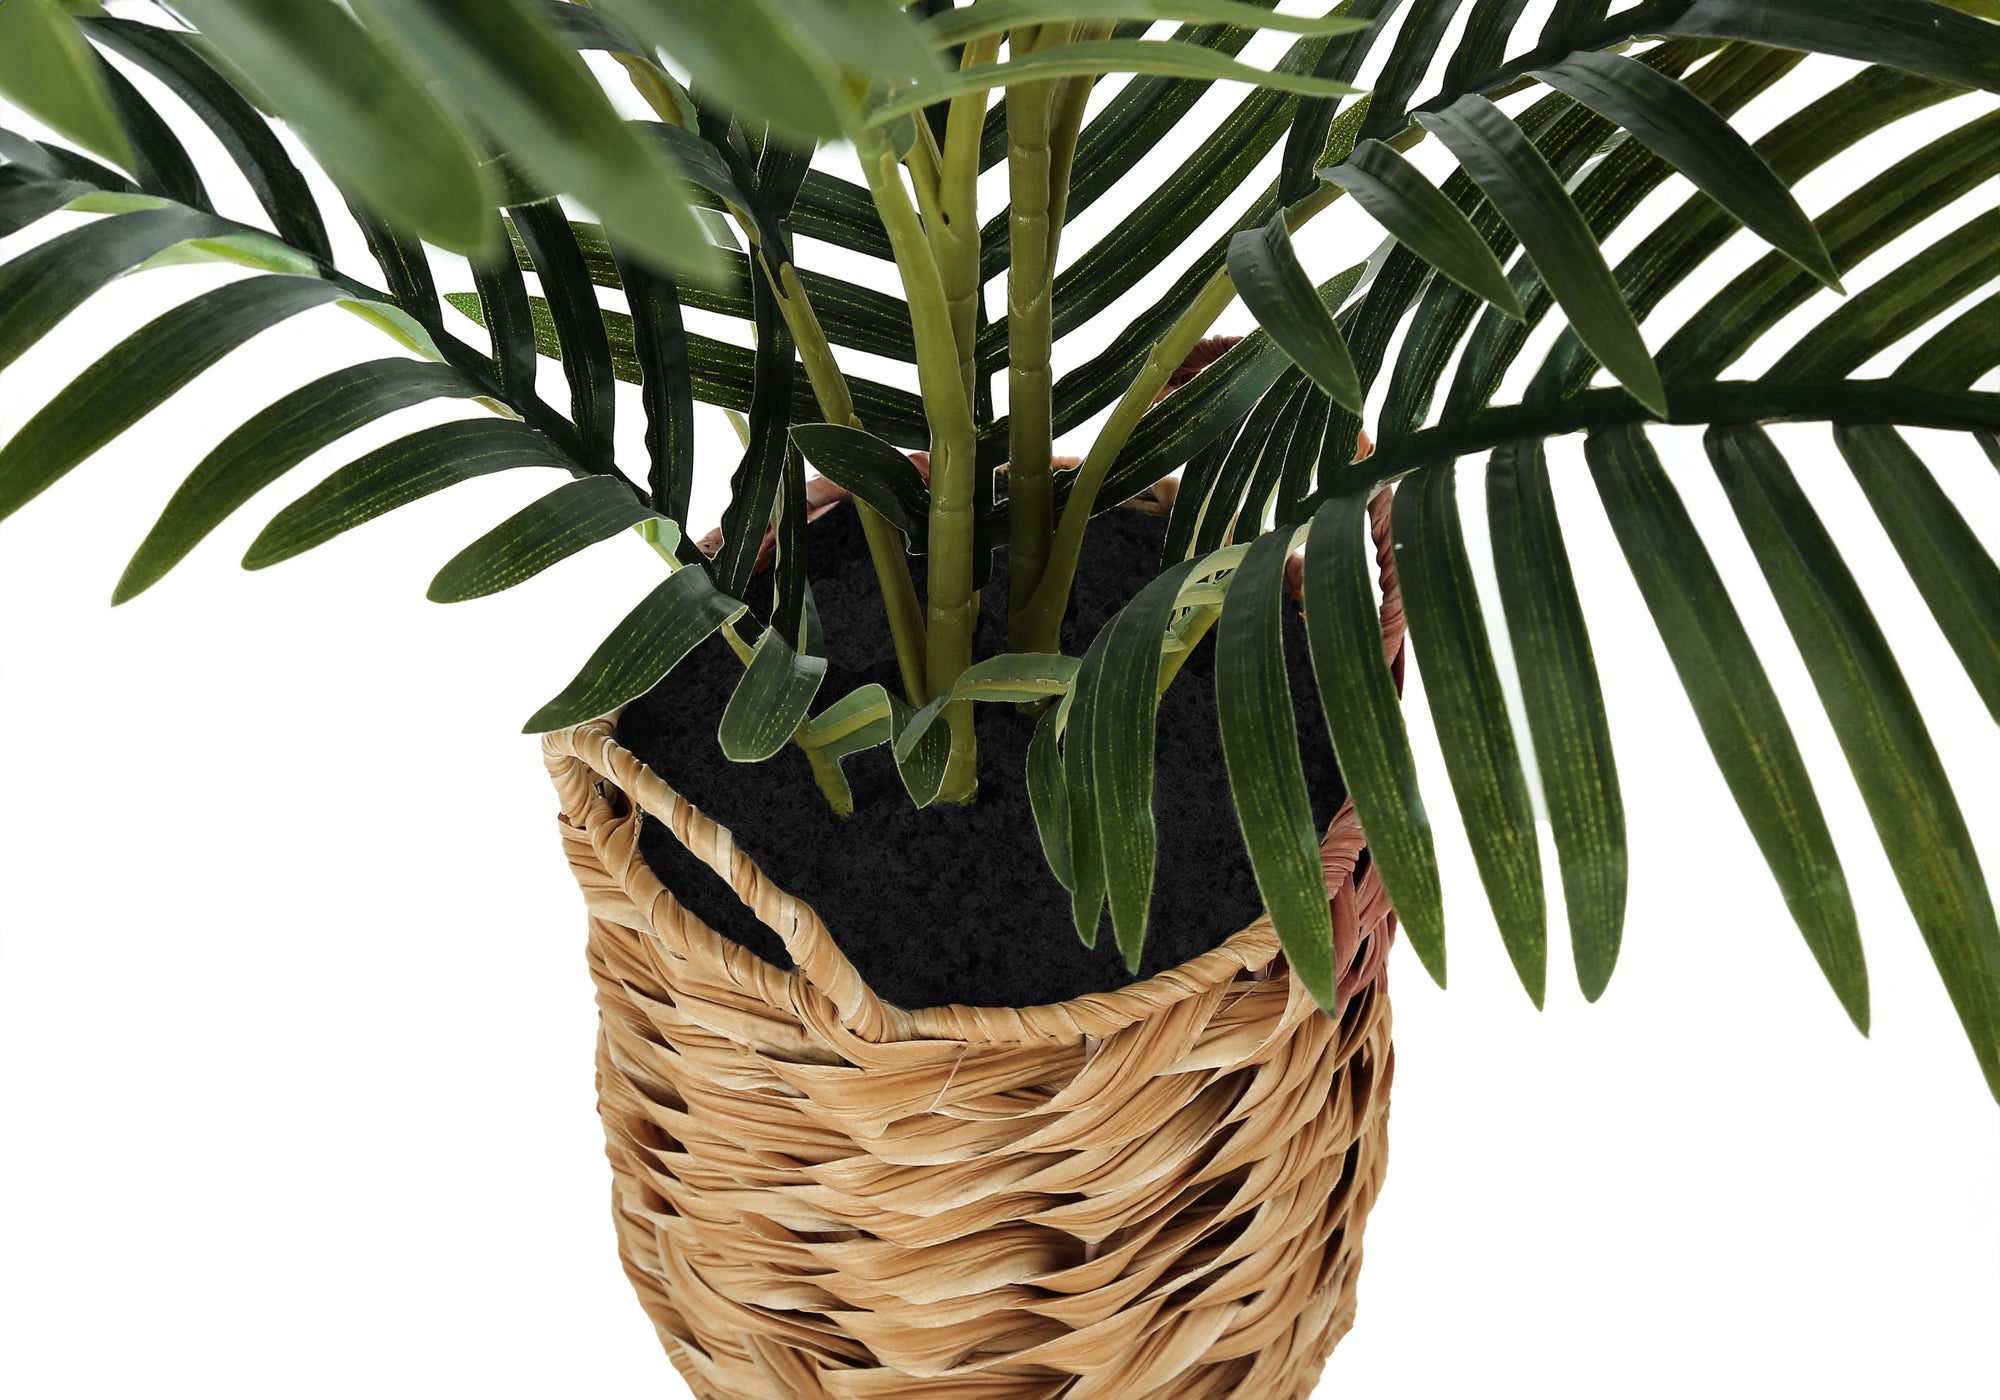 ARTIFICIAL PLANT - 24"H / INDOOR PALM / 8" WOVEN BASKET